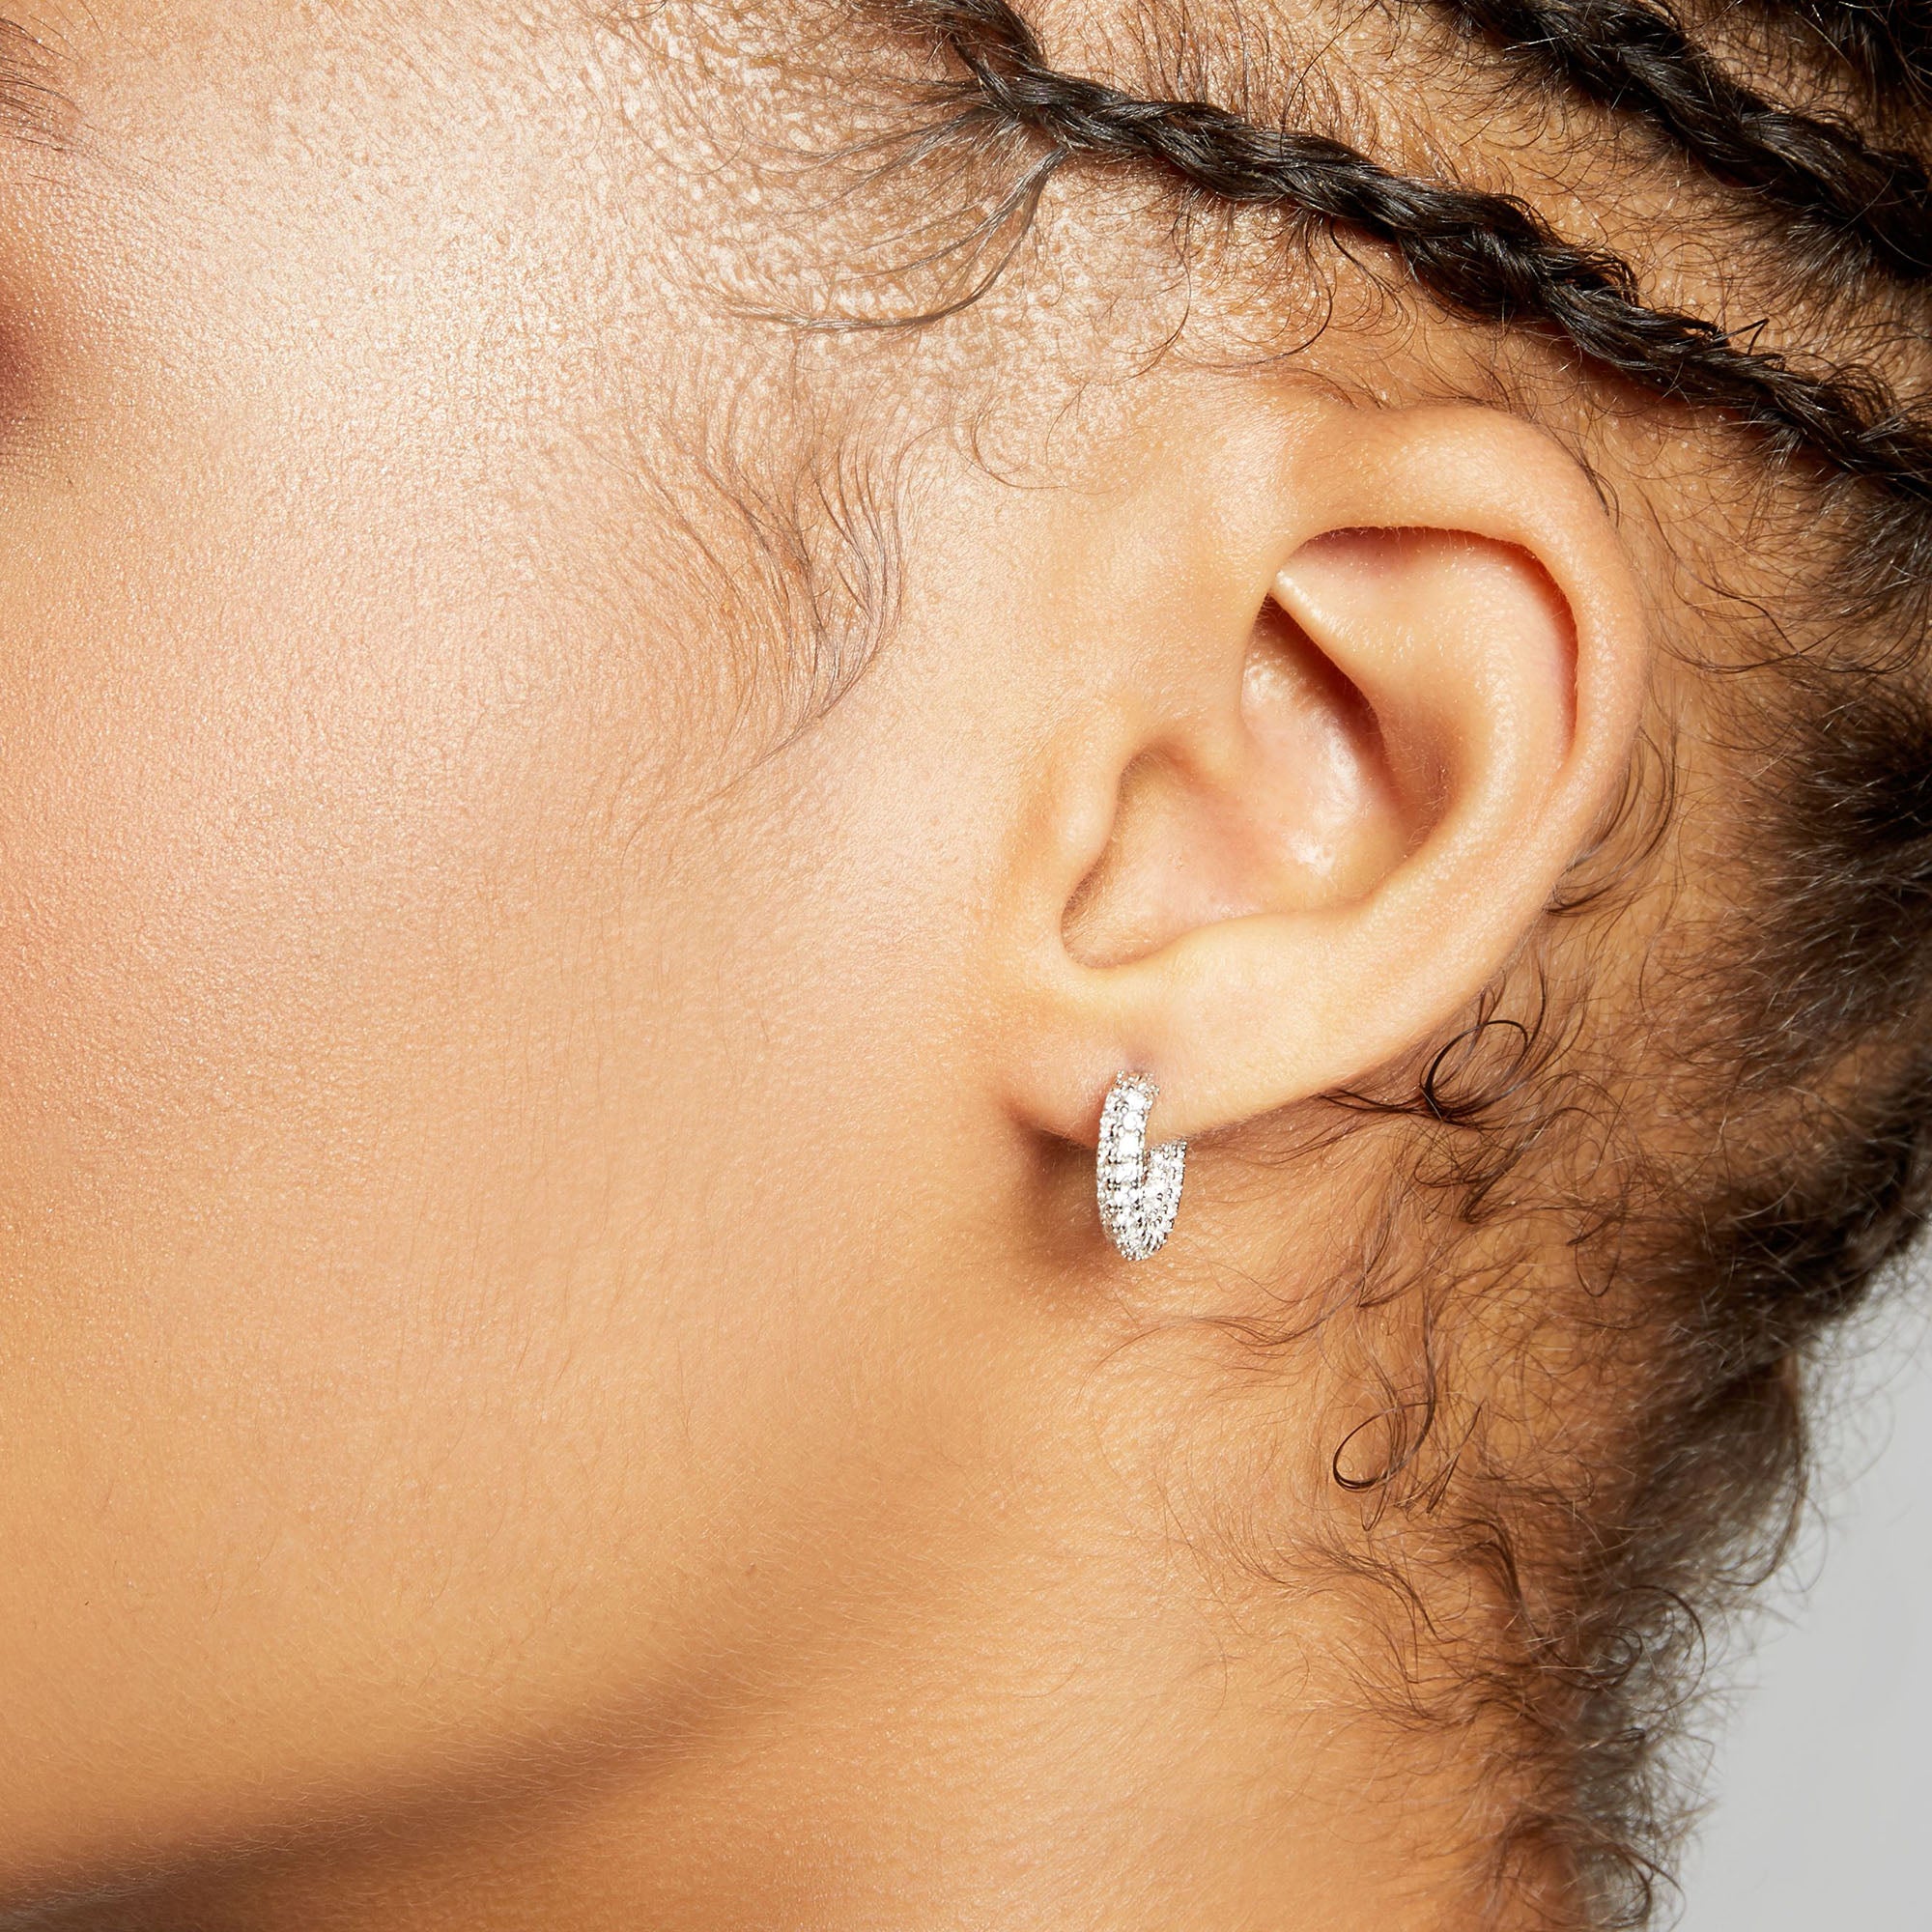 Classic Pave Hoop - Crystal Earrings in Silver for Her